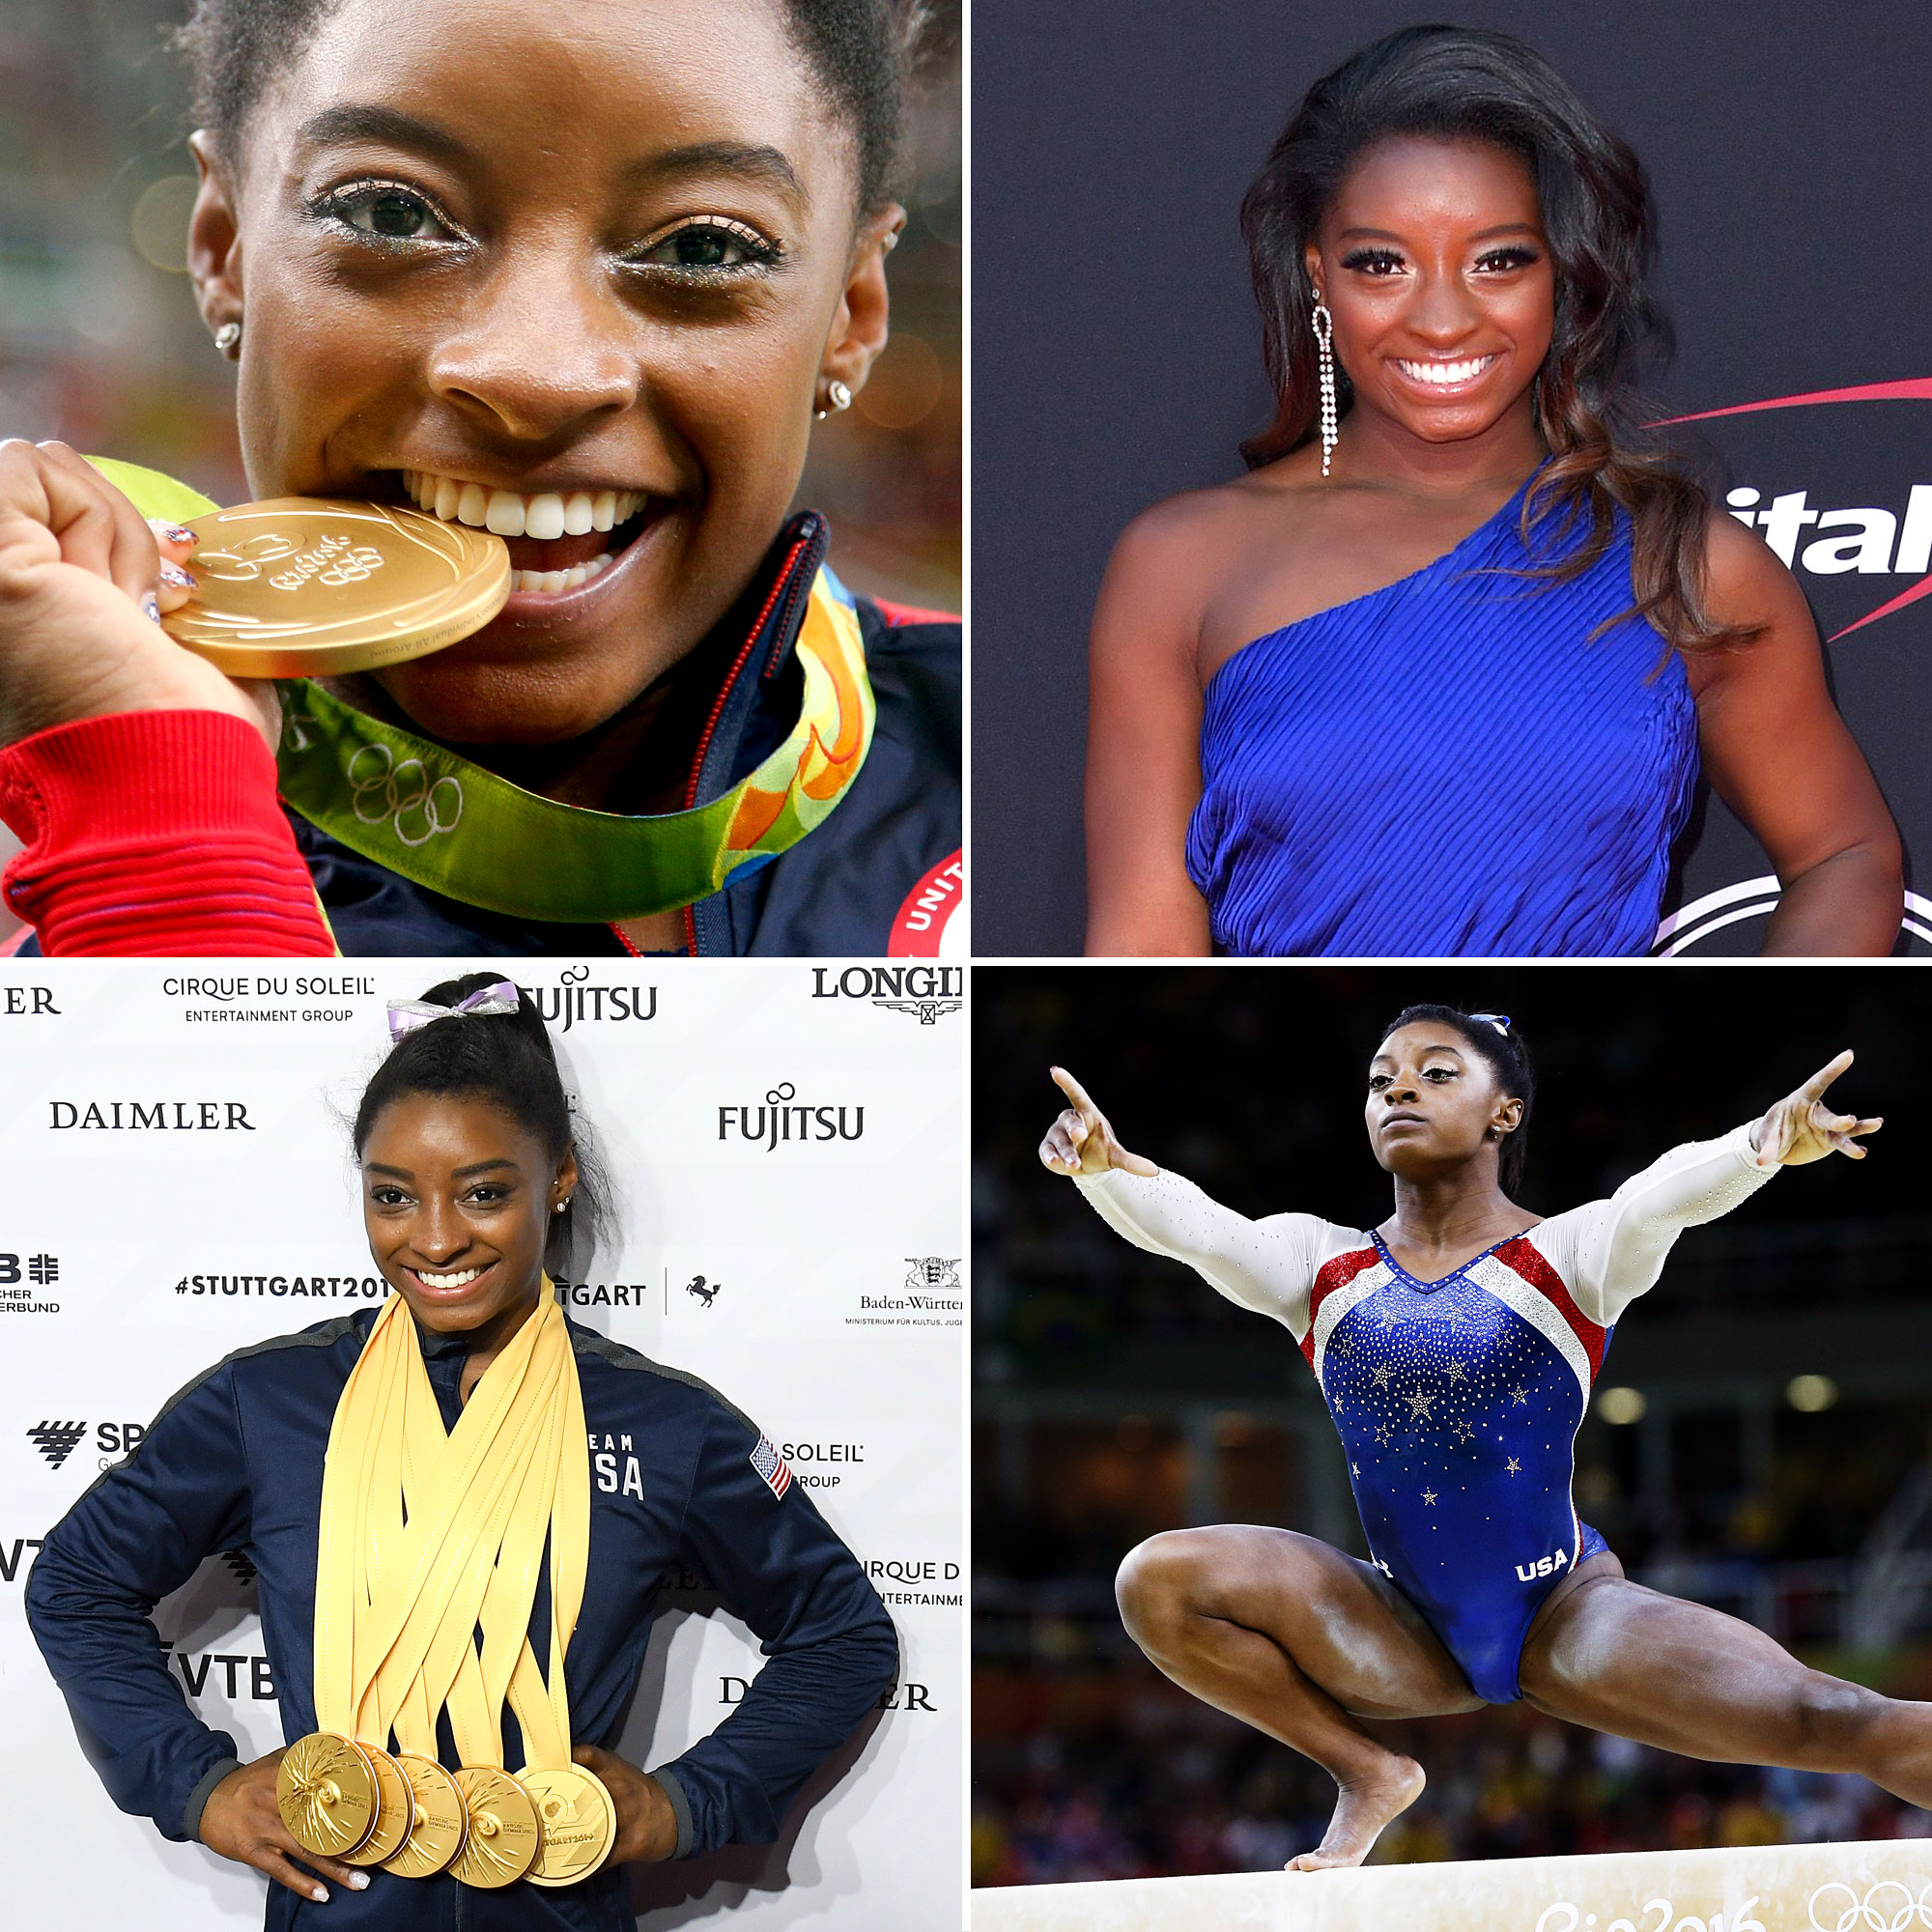 After a 2-Year Hiatus, Simone Biles Just Won Her 20th Gold Medal